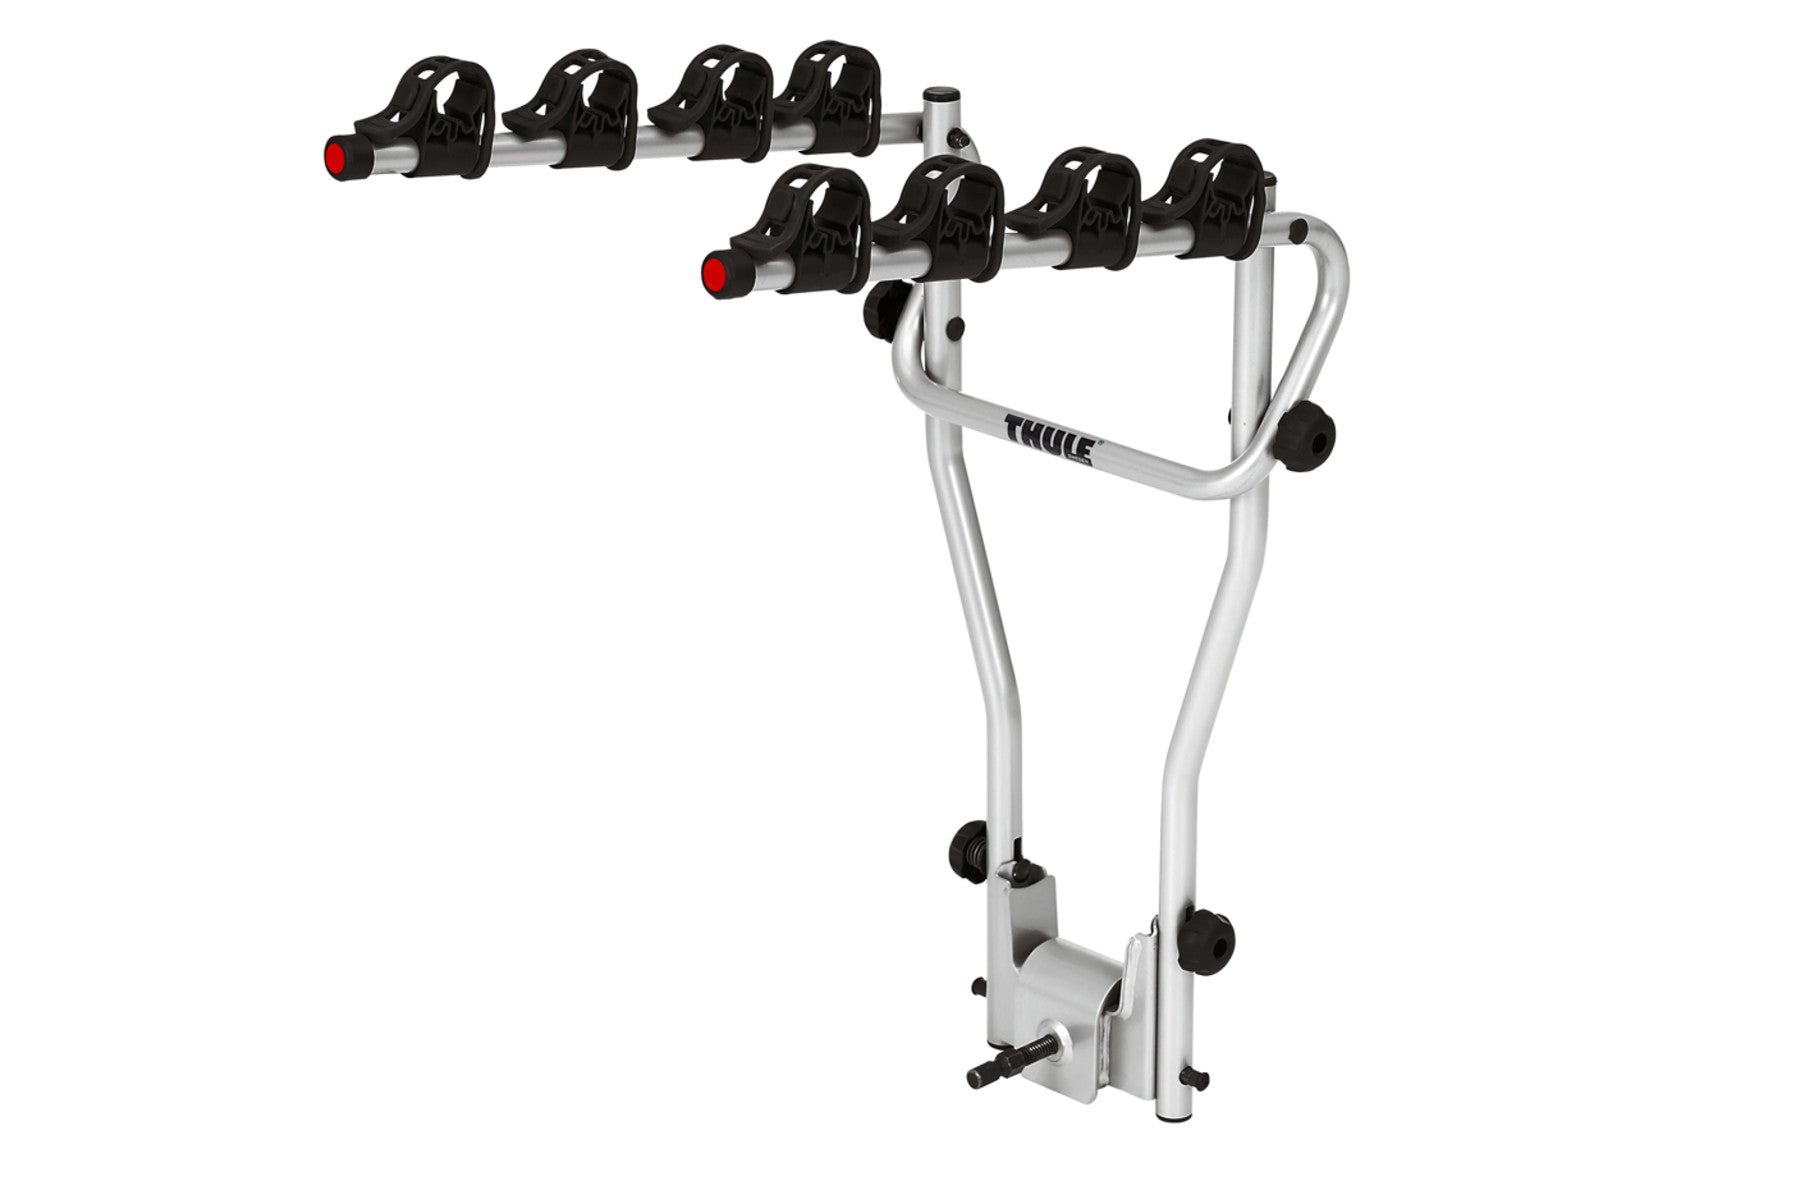 Thule HangOn 4 (Tow Bar Bike Rack) with tilt update - Letang Auto Electrical Vehicle Parts